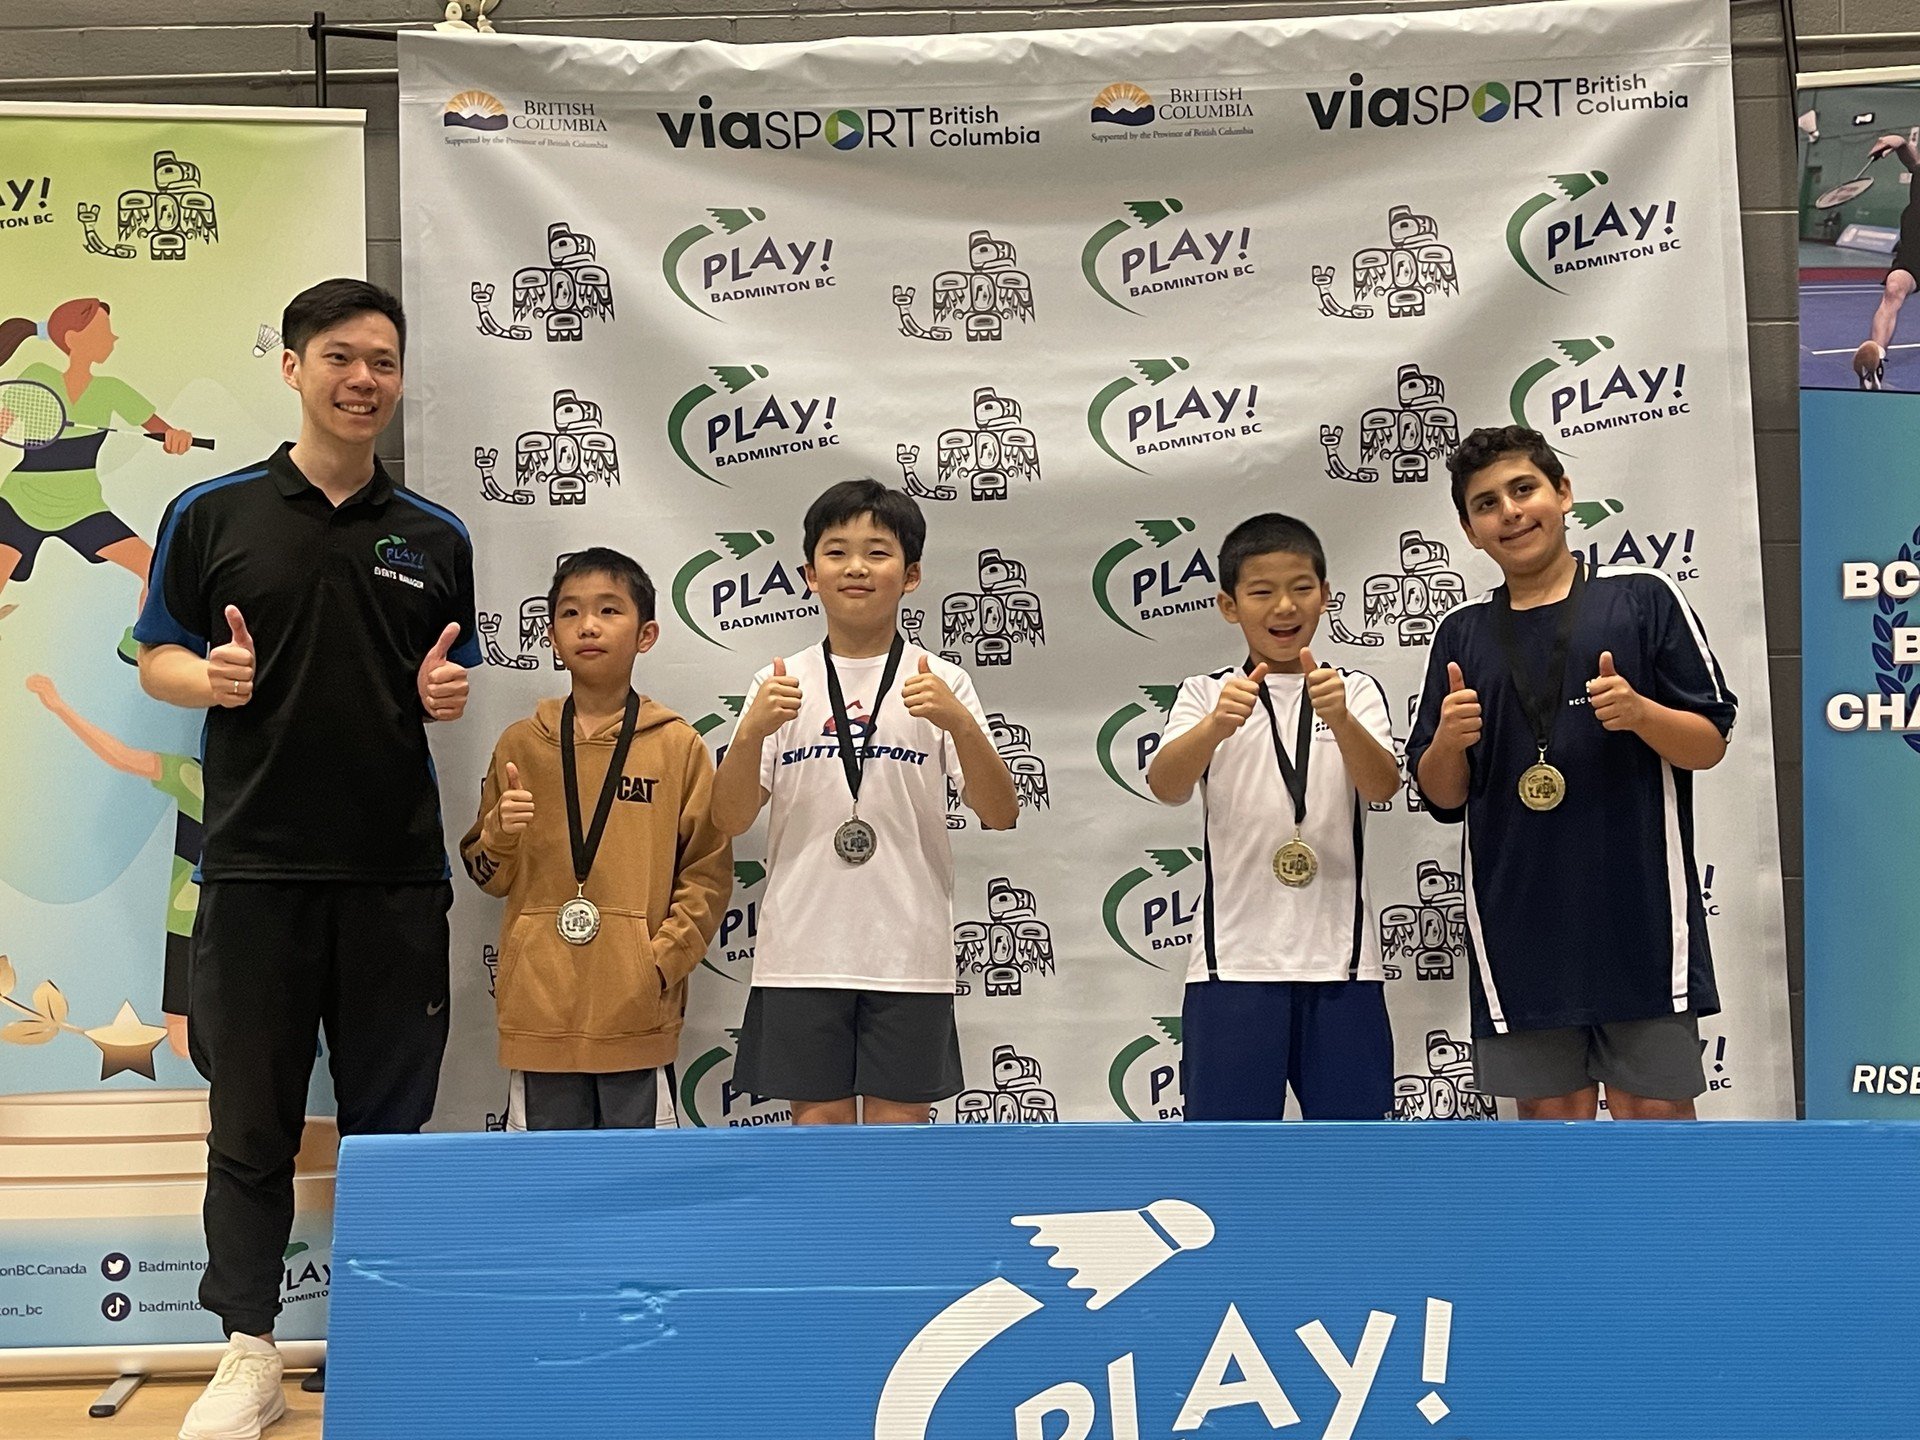 Congratulations to our Junior Team Hawks players for their exceptional performance at the 2024 BC Provincial Championships last weekend, securing an impressive total of 5 golds, 2 silvers, and 2 bronzes!
- Marcus Zhou: U17 BD and XD Gold medalist and